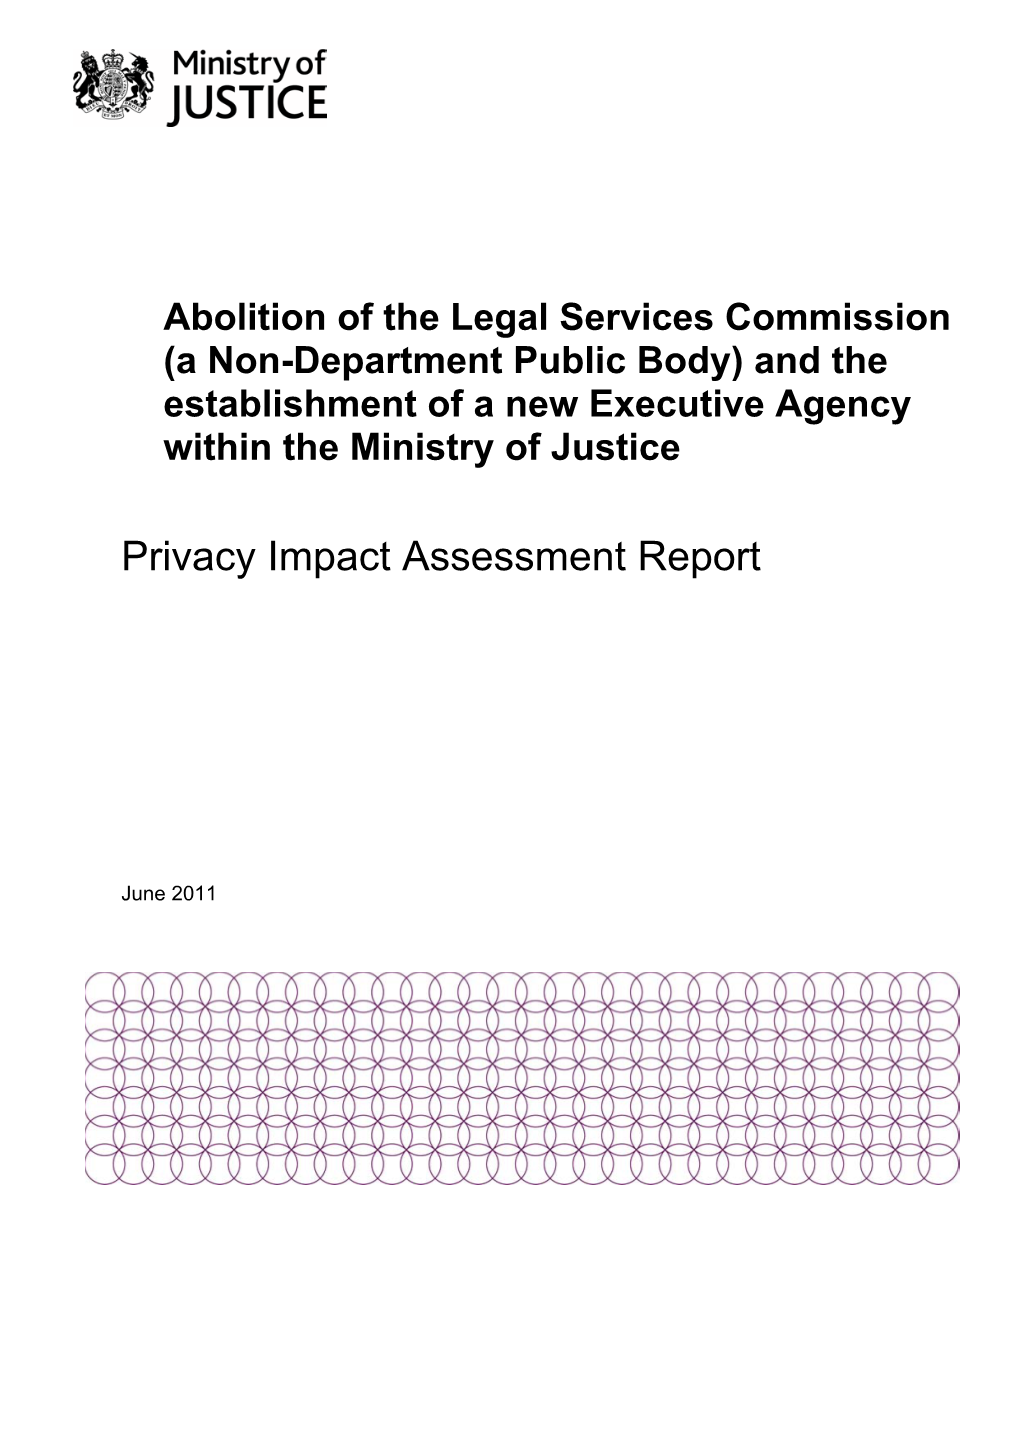 Abolition of the Legal Services Commission (A Non-Department Public Body) and the Establishment of a New Executive Agency Within the Ministry of Justice